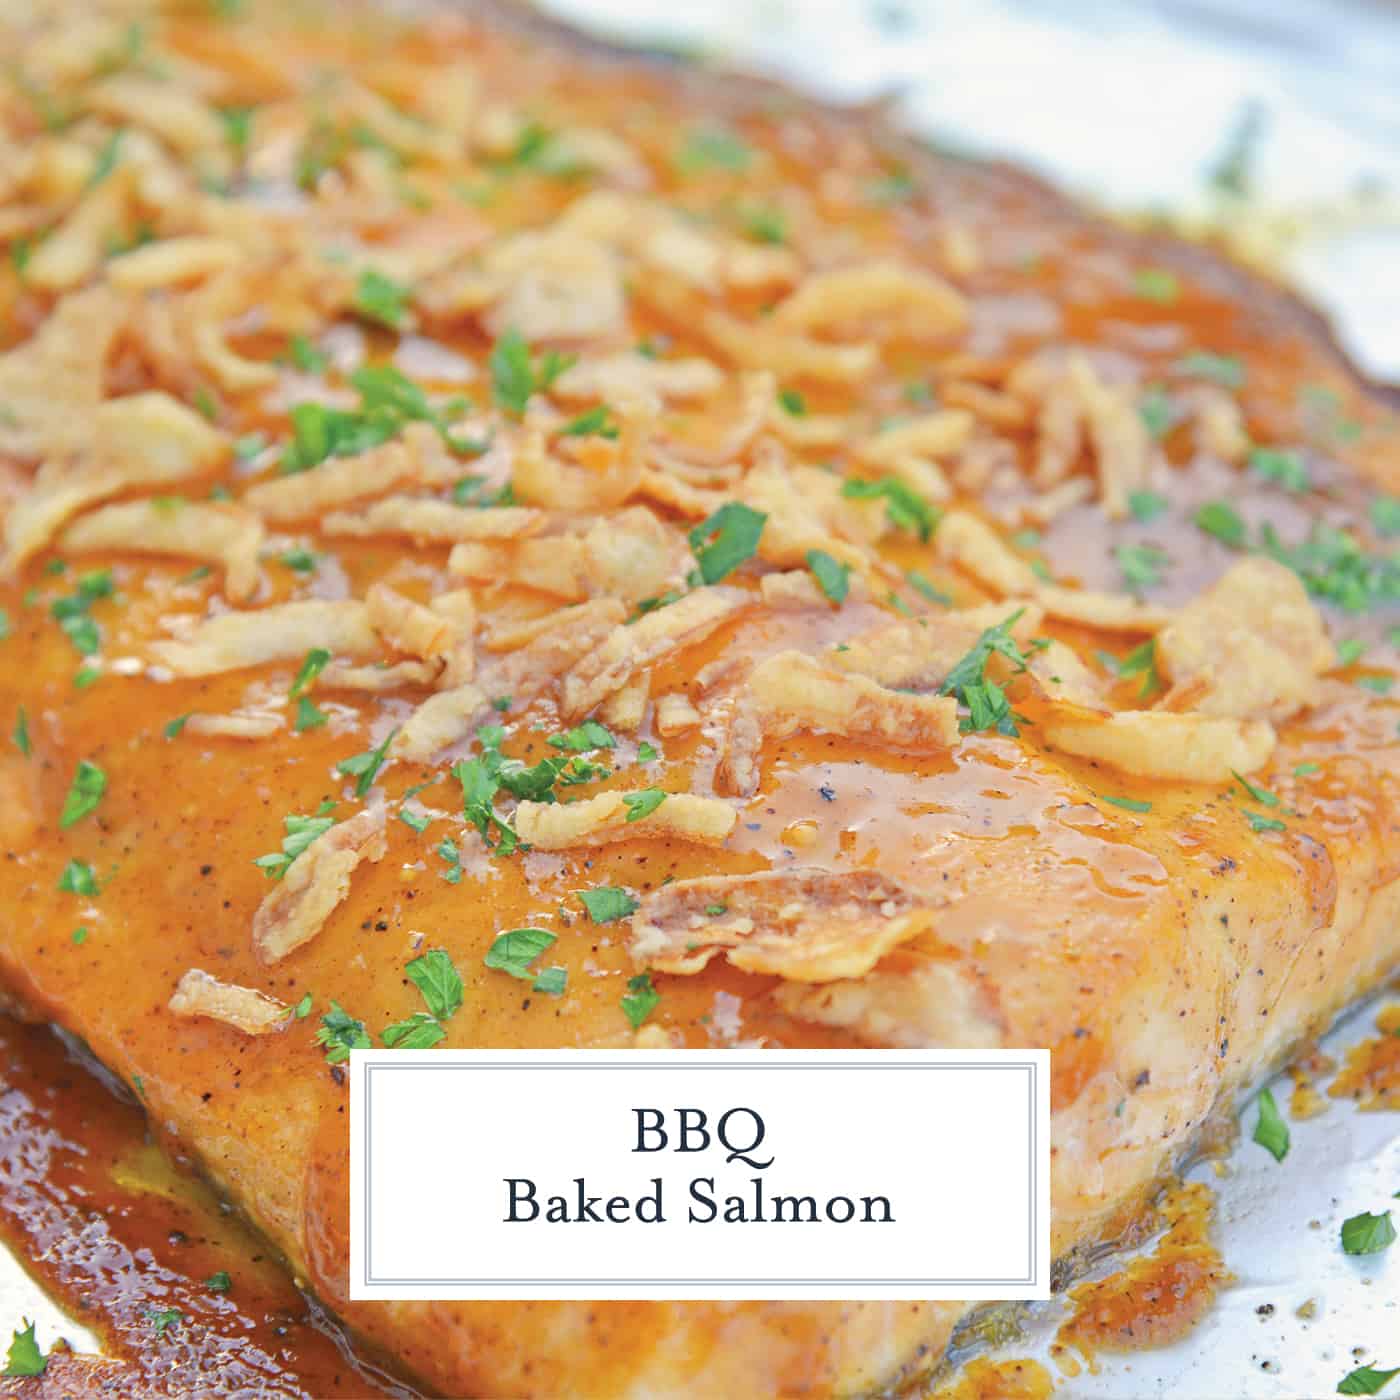 This BBQ Baked Salmon requires just 20 minutes and a handful of ingredients. Flavorful, quick and easy! Sure to become your favorite salmon recipe. #bakedsalmon #salmonrecipes www.savoryexperiments.com